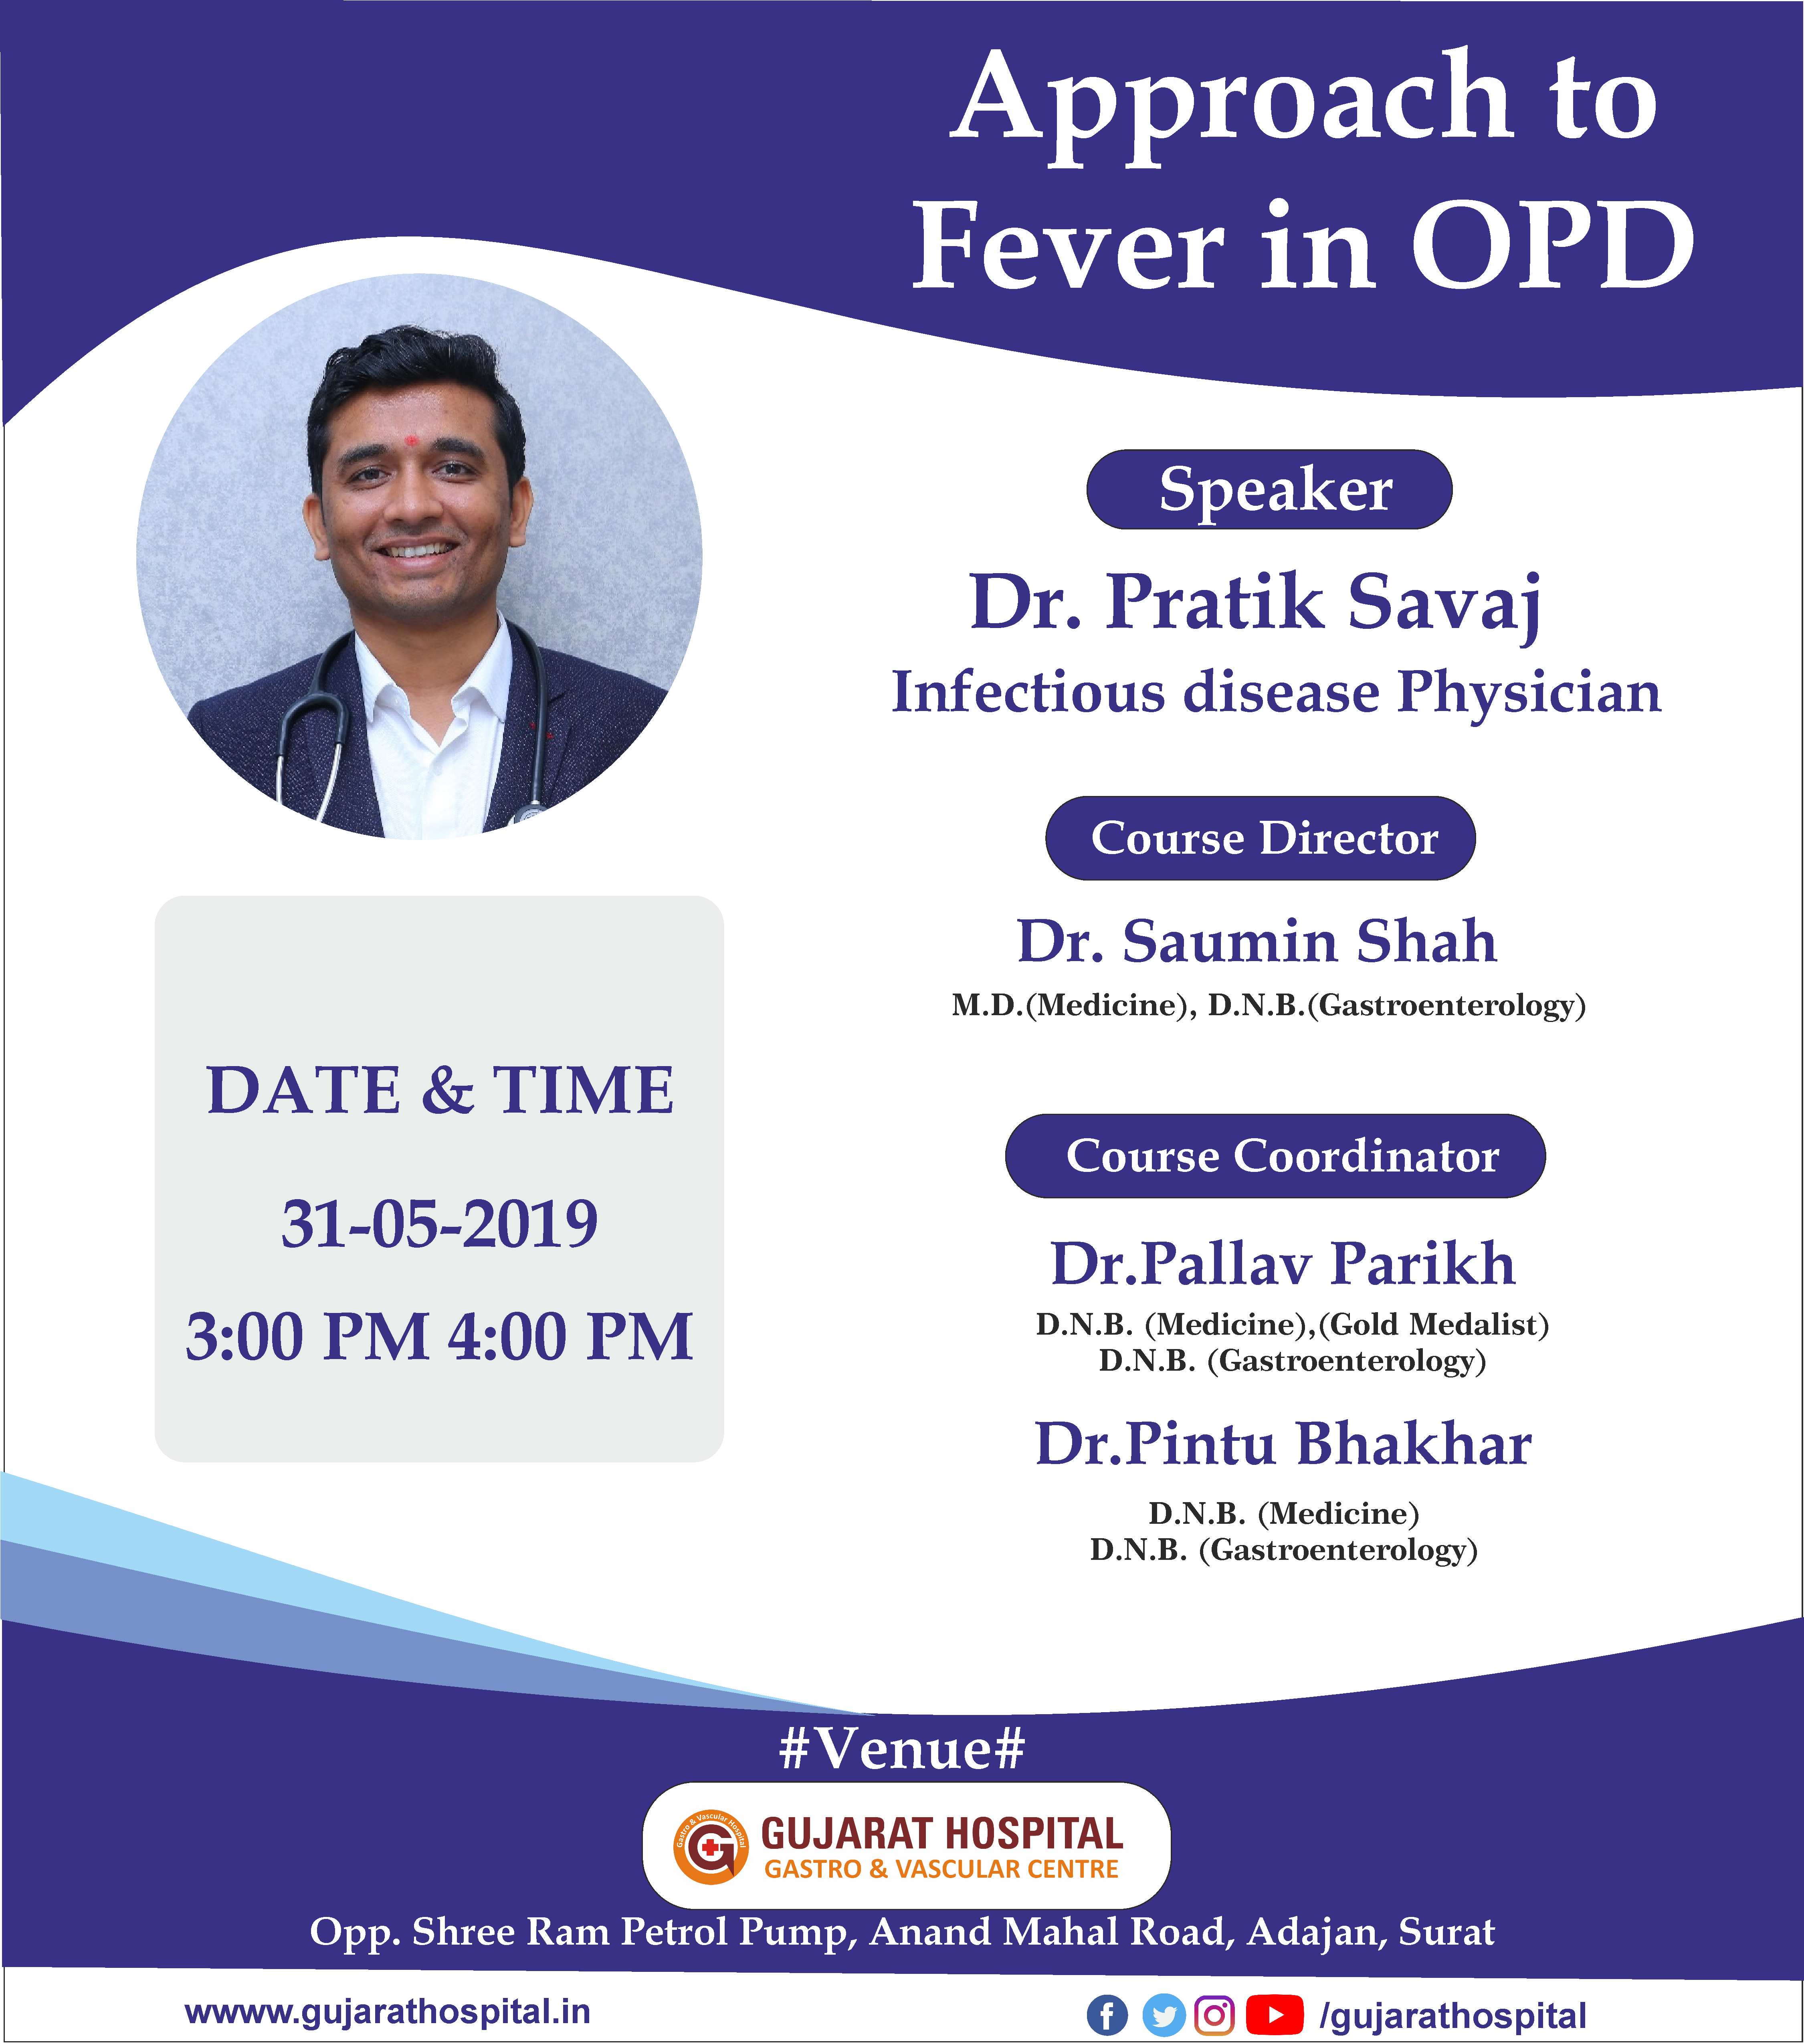 Approach to Fever in OPD